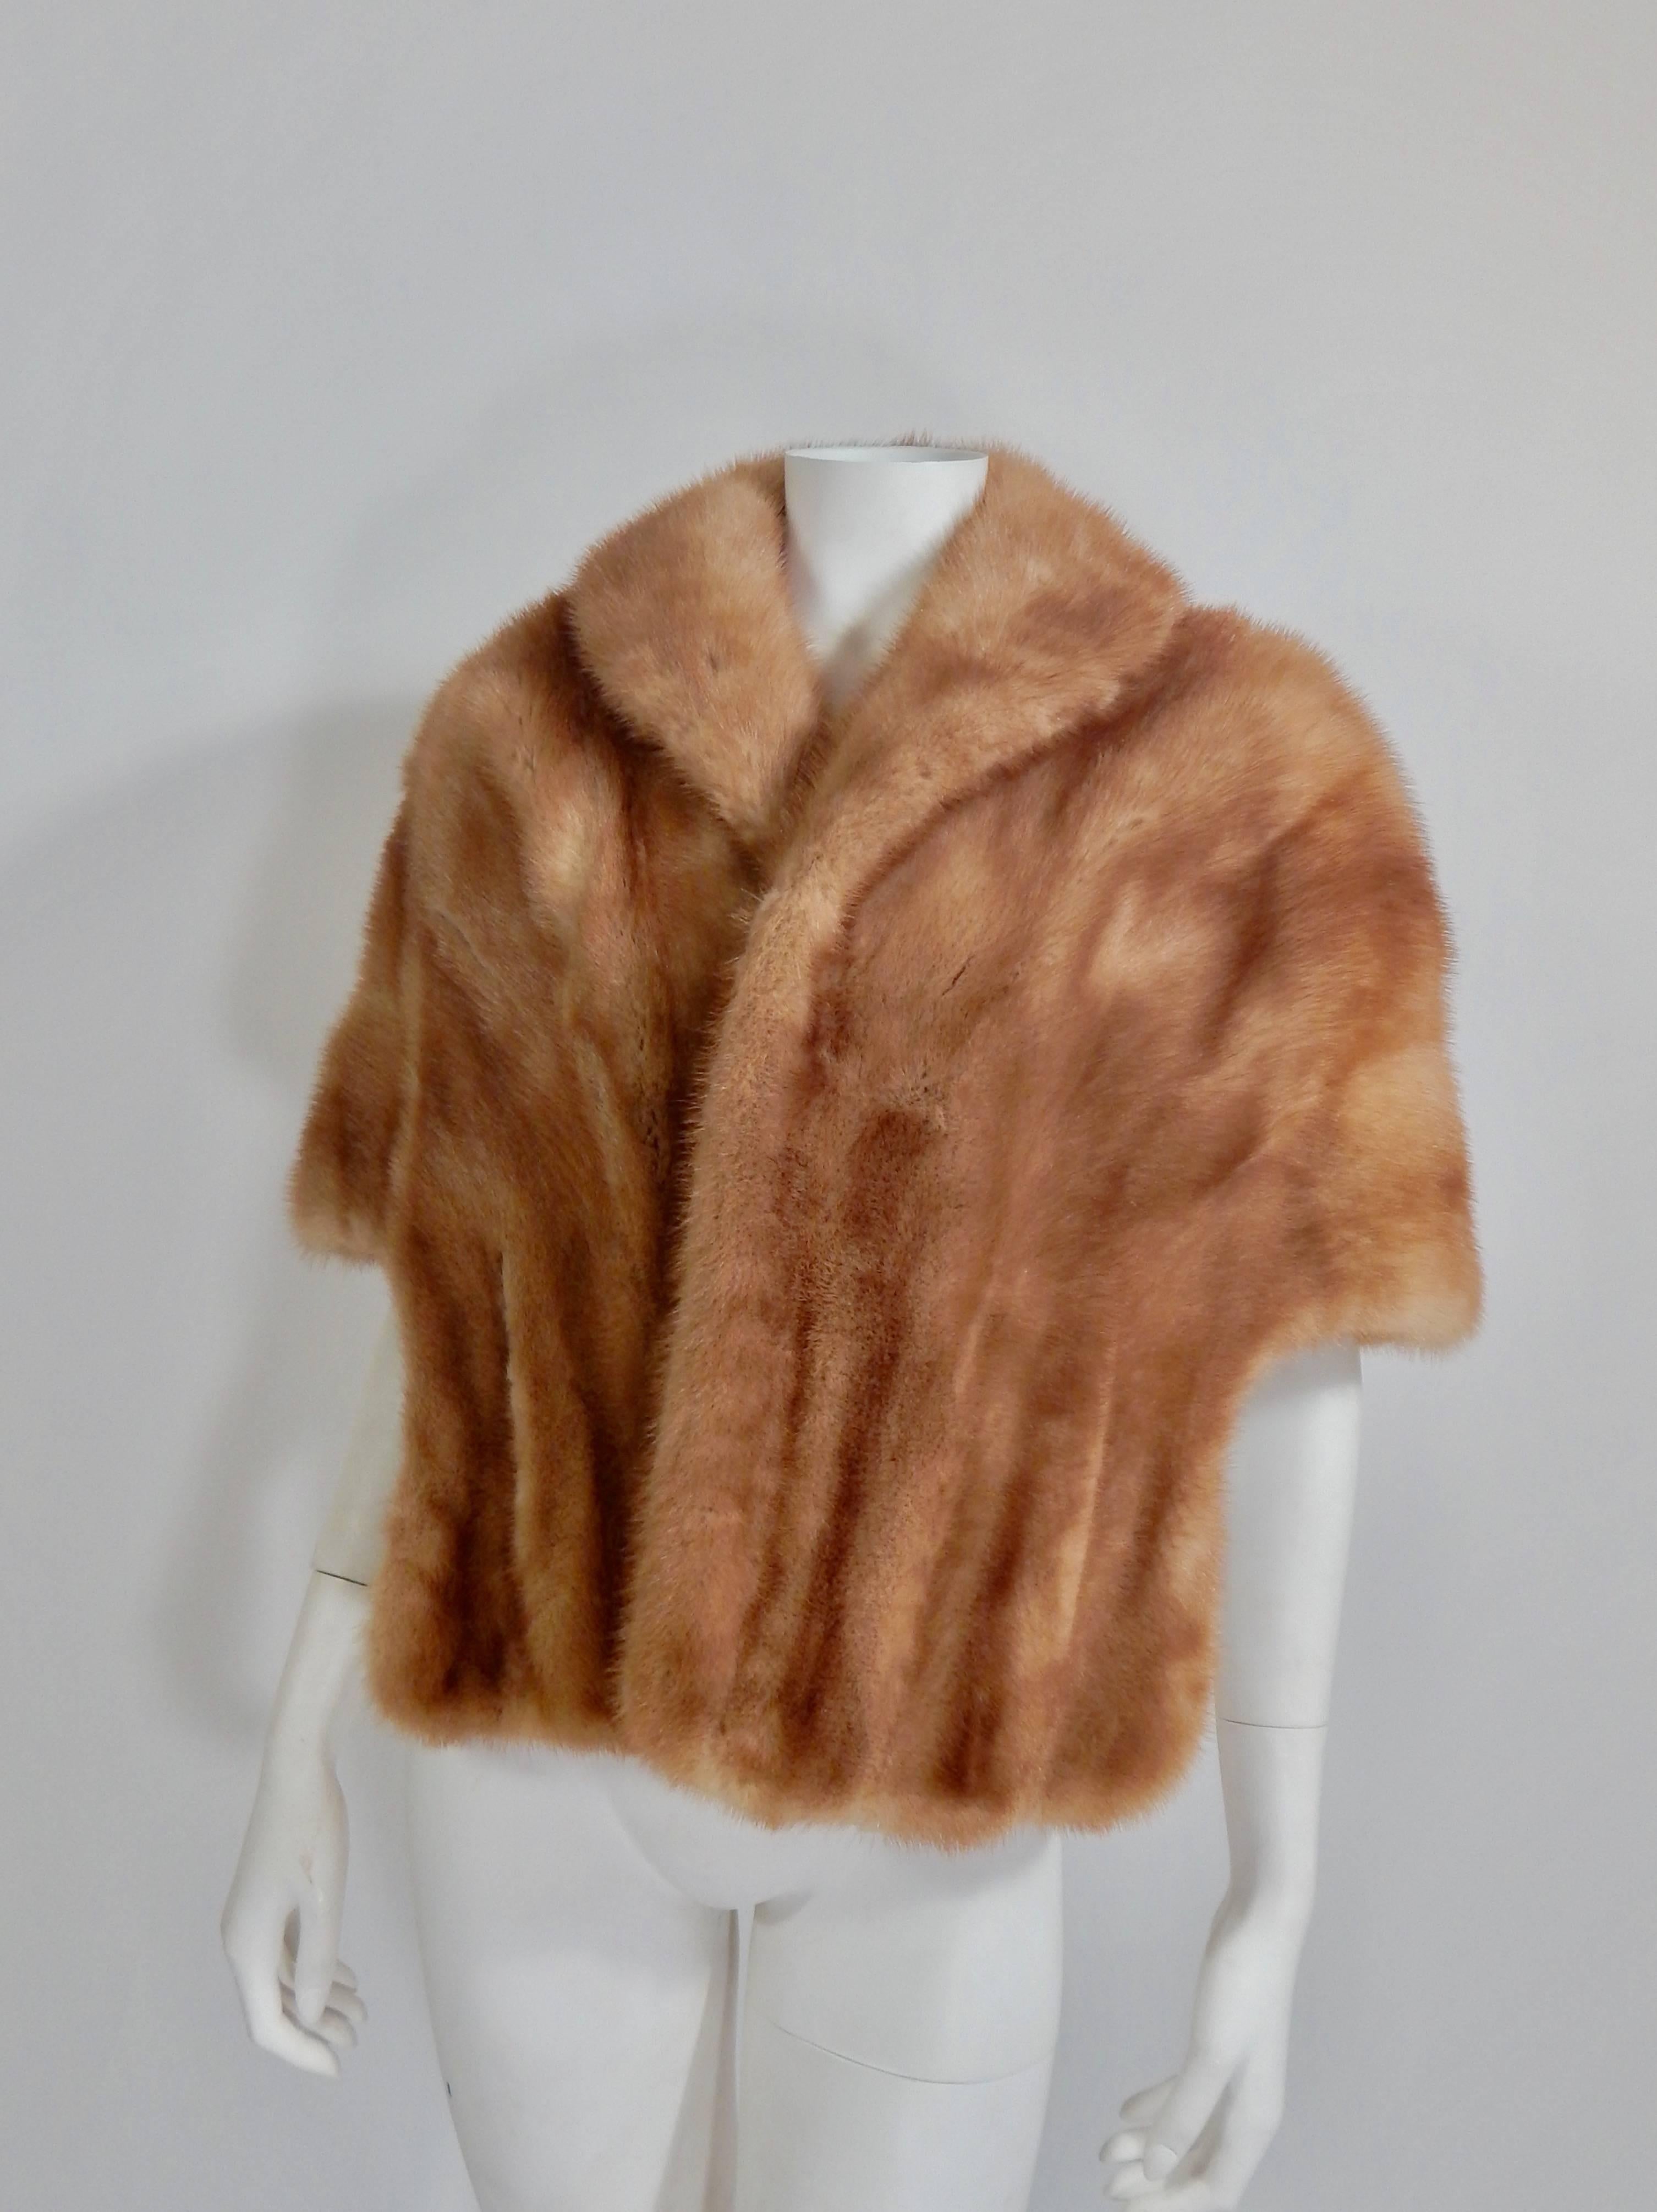 Gorgeous 1950s / 1960s Mink Stole by Evans, Paris Milan Chicago. Hand Pockets. Fully lined in silk. Embroidered on the inside lining where there is usually a name or monogram is the Spanish word Chiquita which means, baby, honey, doll, etc. 
Size